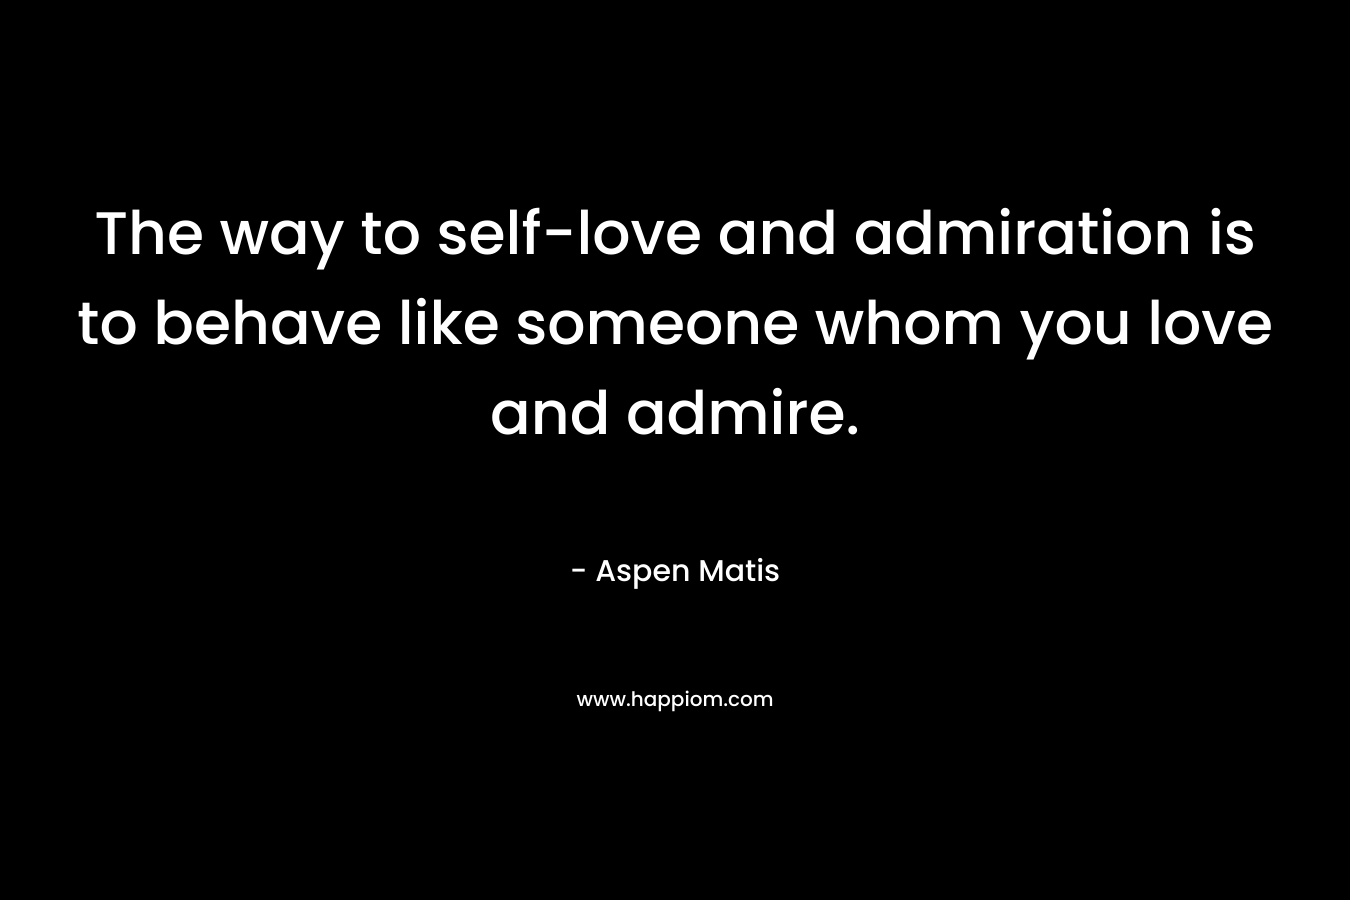 The way to self-love and admiration is to behave like someone whom you love and admire.